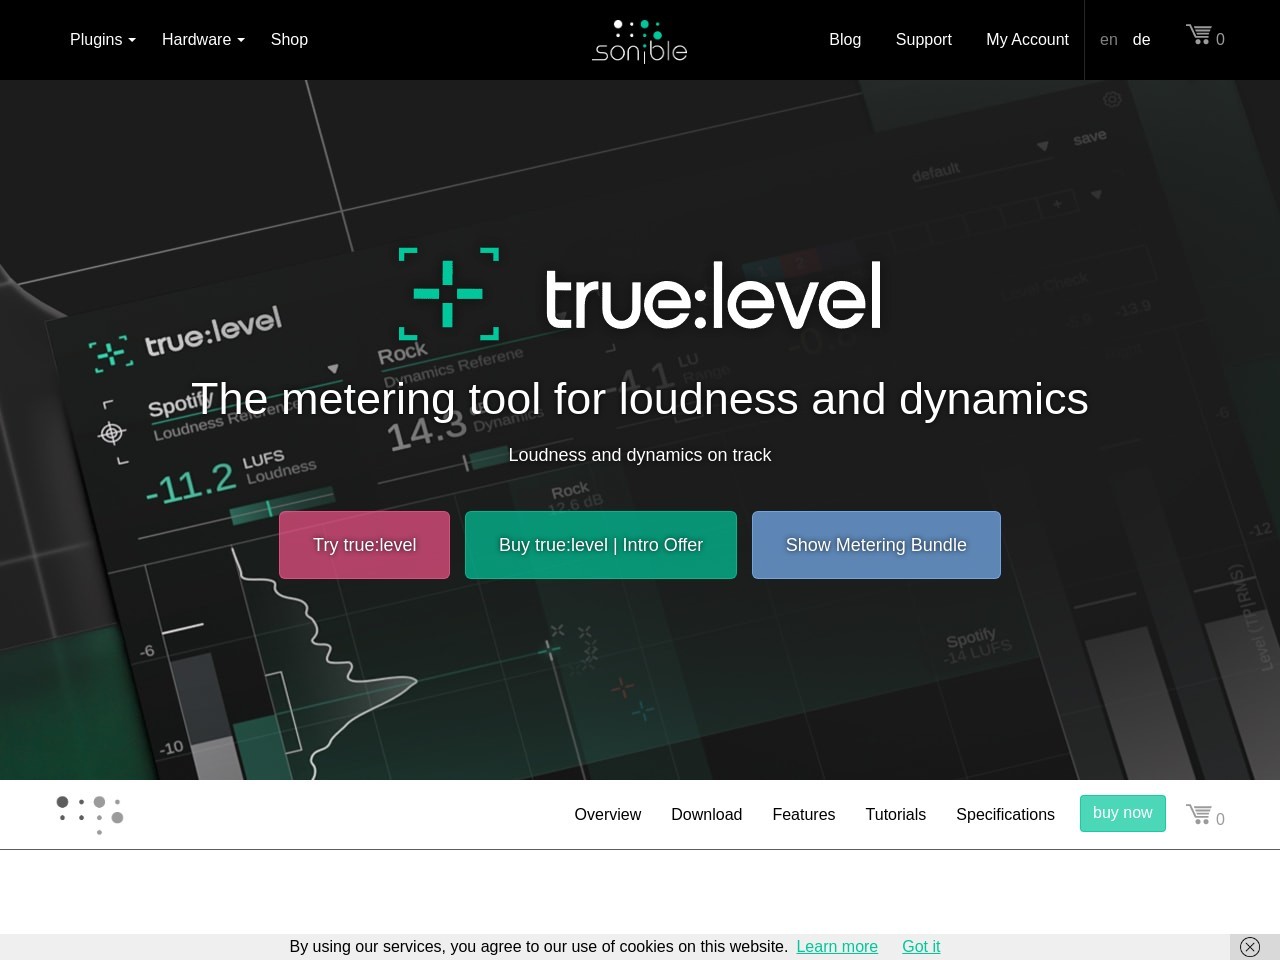 true:level - The plug-in for measuring loudness and dynamics - sonible